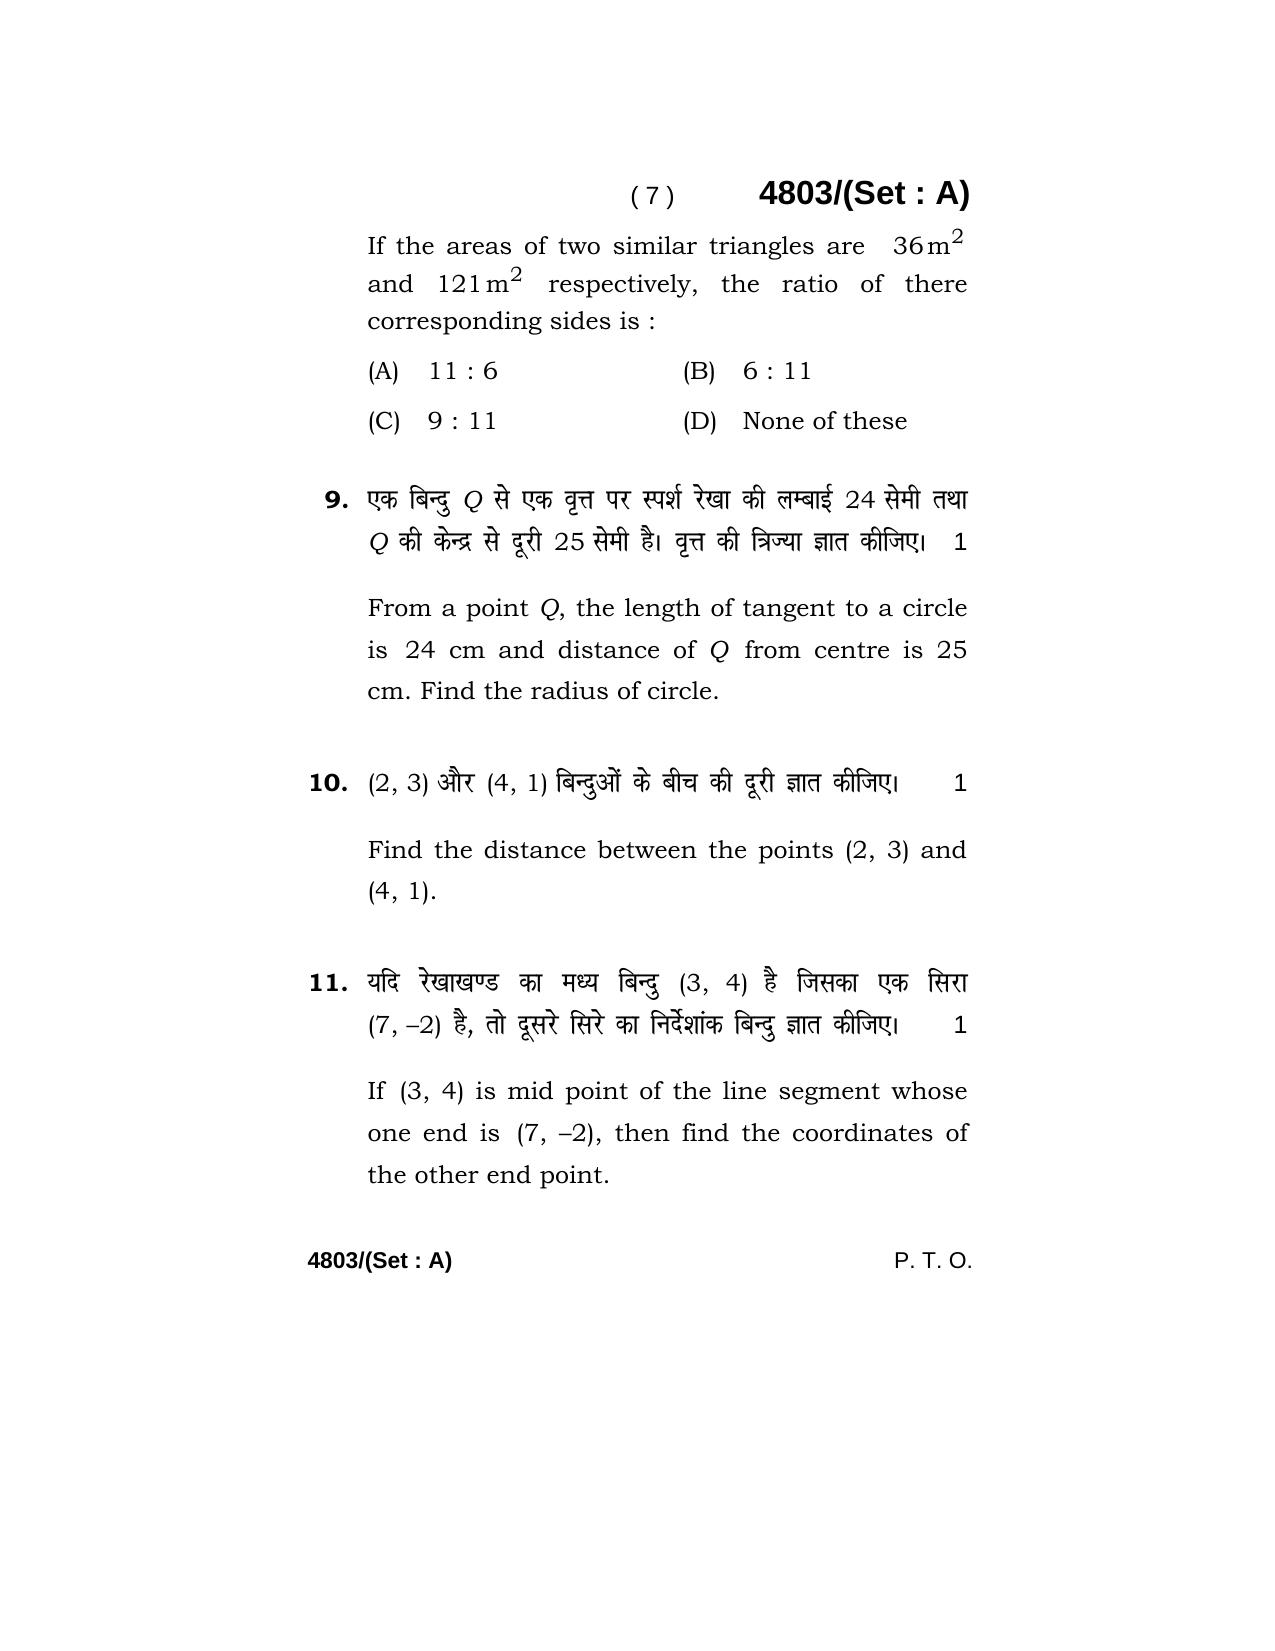 Haryana Board HBSE Class 10 Mathematics 2020 Question Paper - Page 7